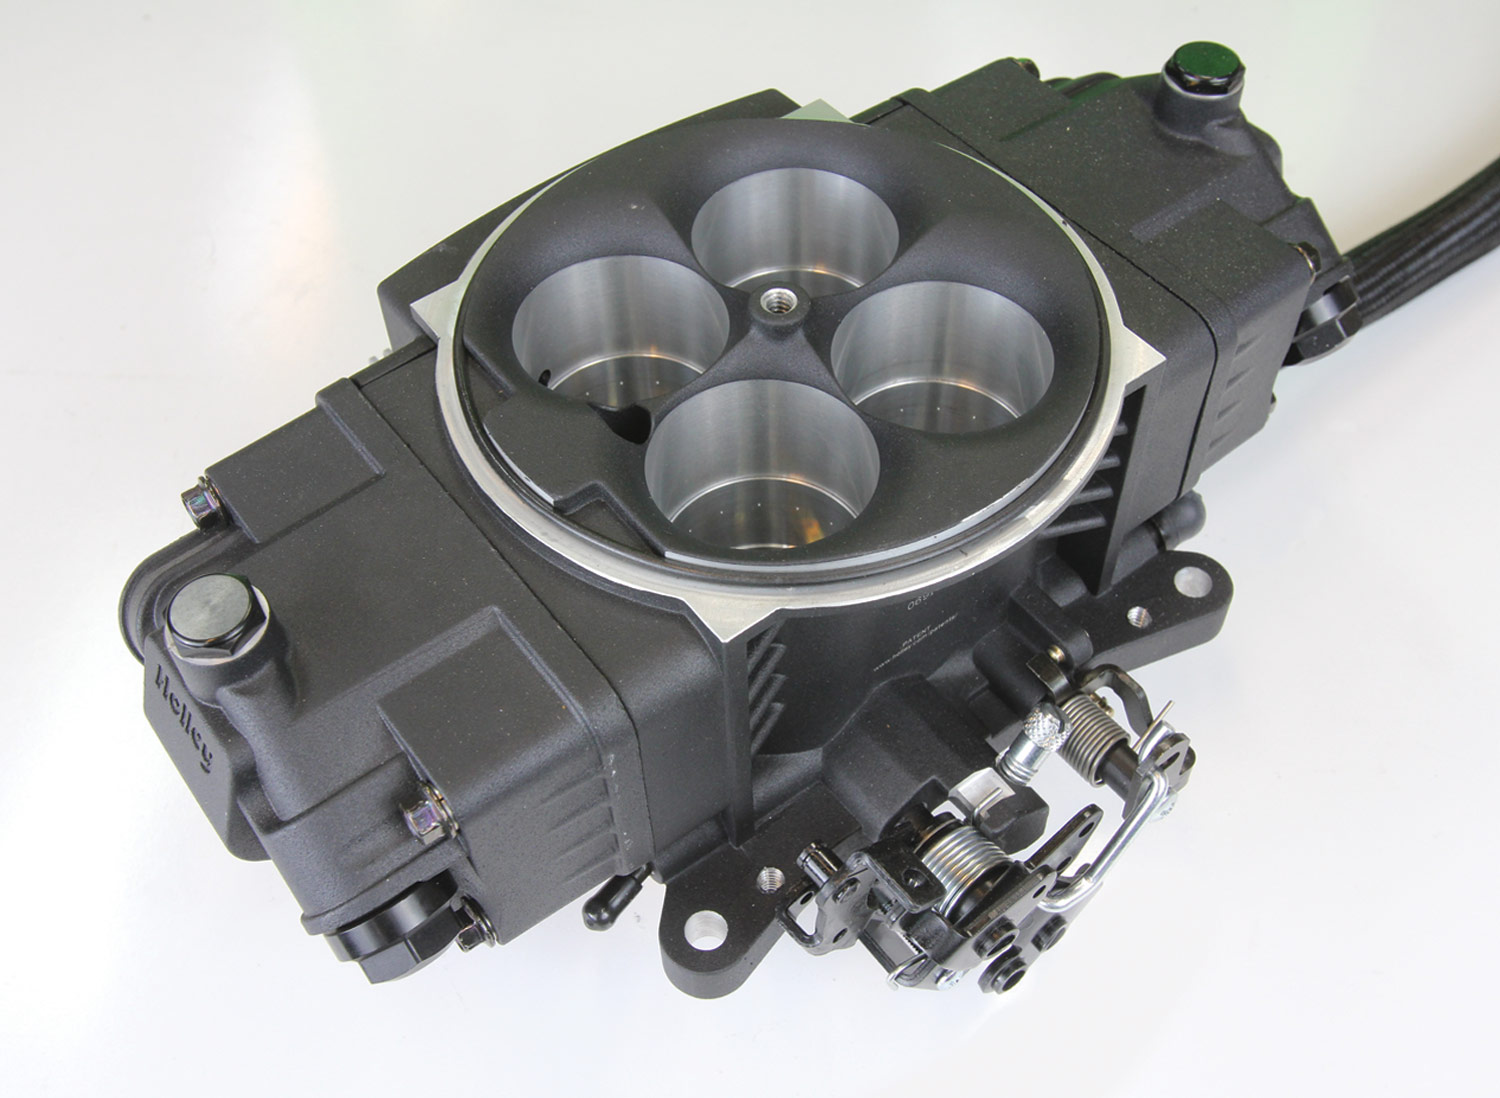 an aftermarket four-barrel throttle body-type EFI system from Holley Performance